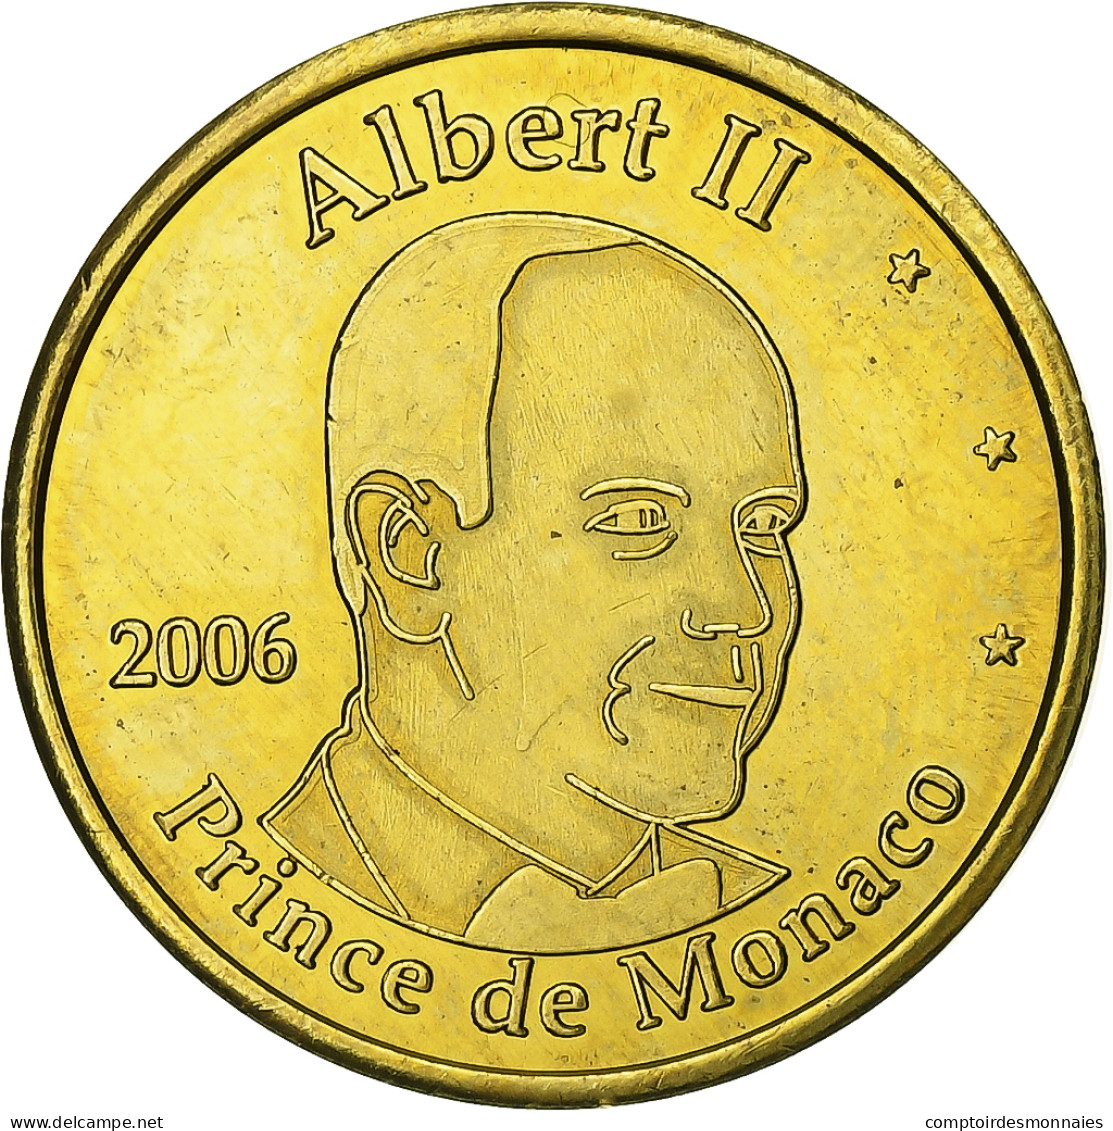 Monaco, 50 Euro Cent, Unofficial Private Coin, 2006, Laiton, SPL+ - Private Proofs / Unofficial